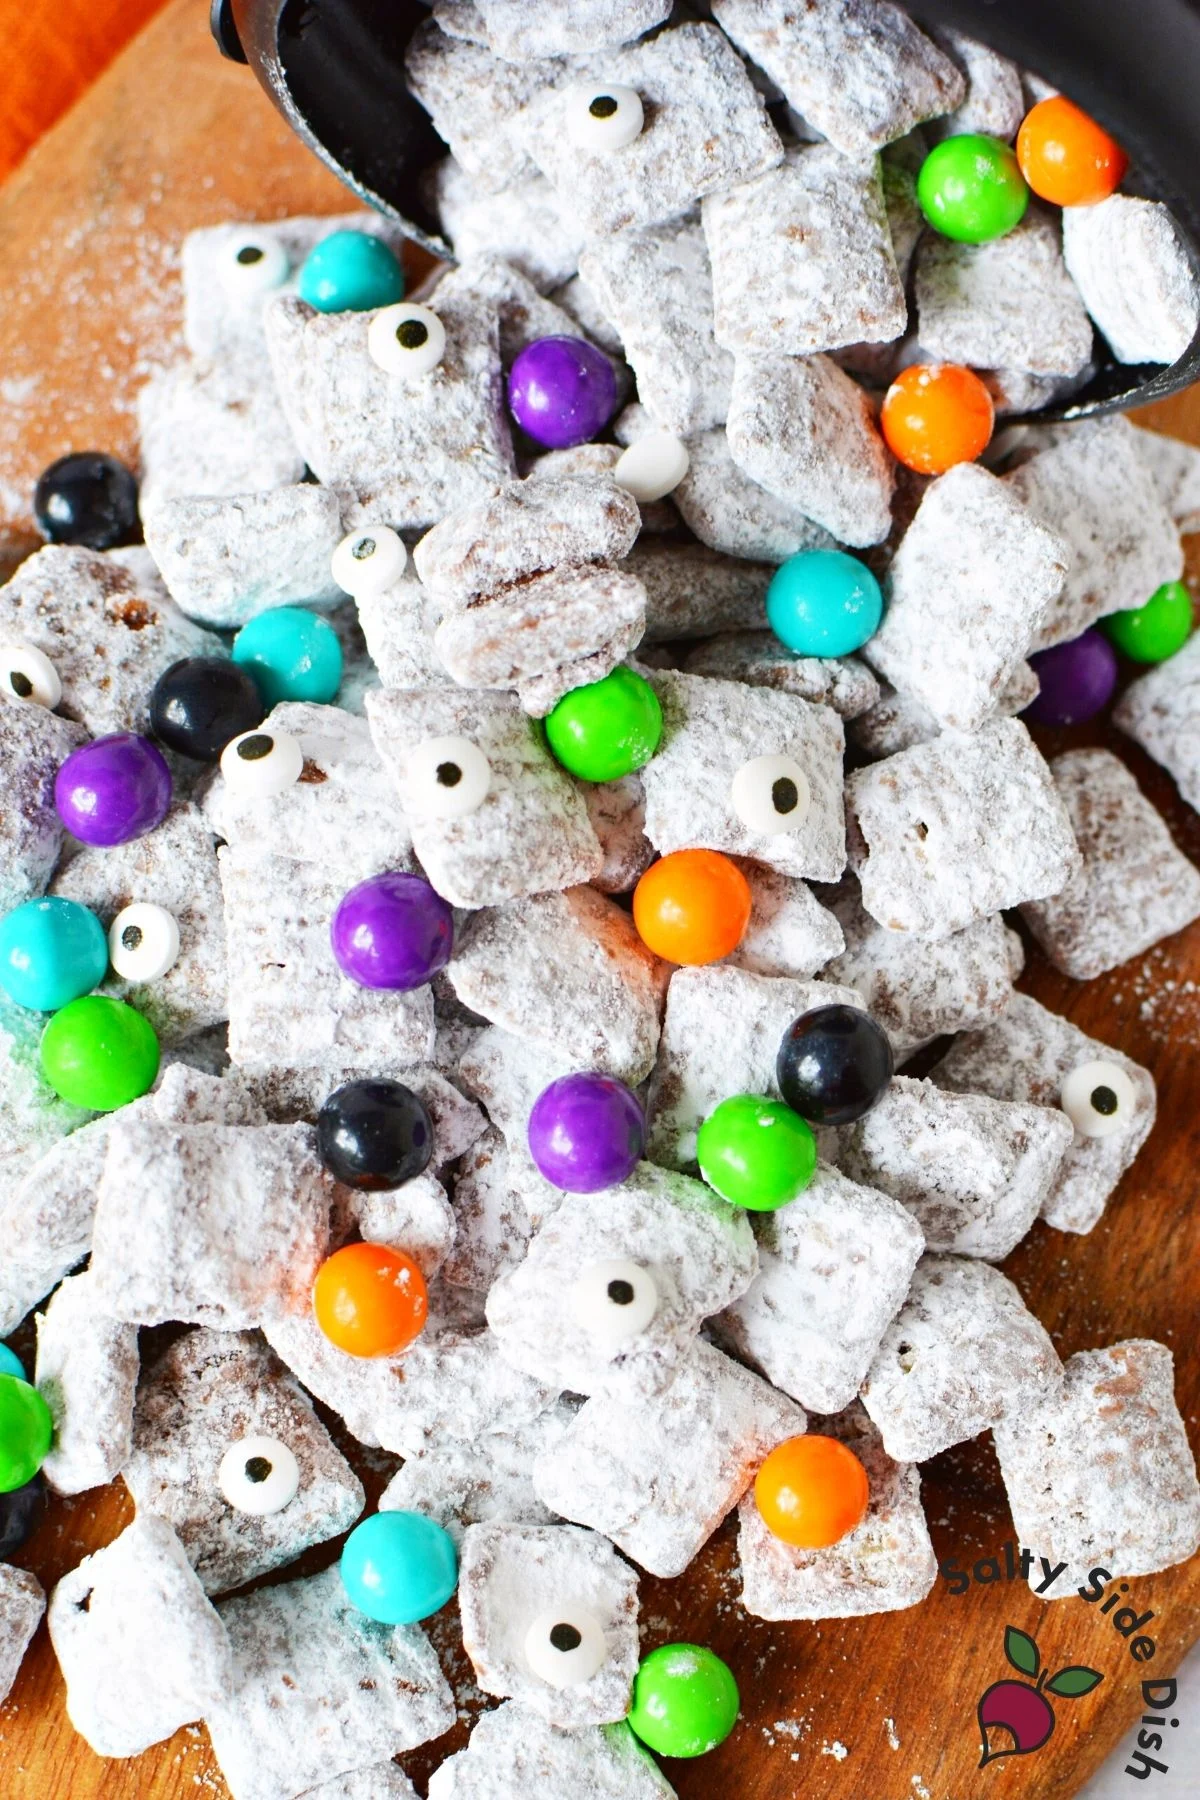 Halloween puppy chow shown with a mix colorful candies.